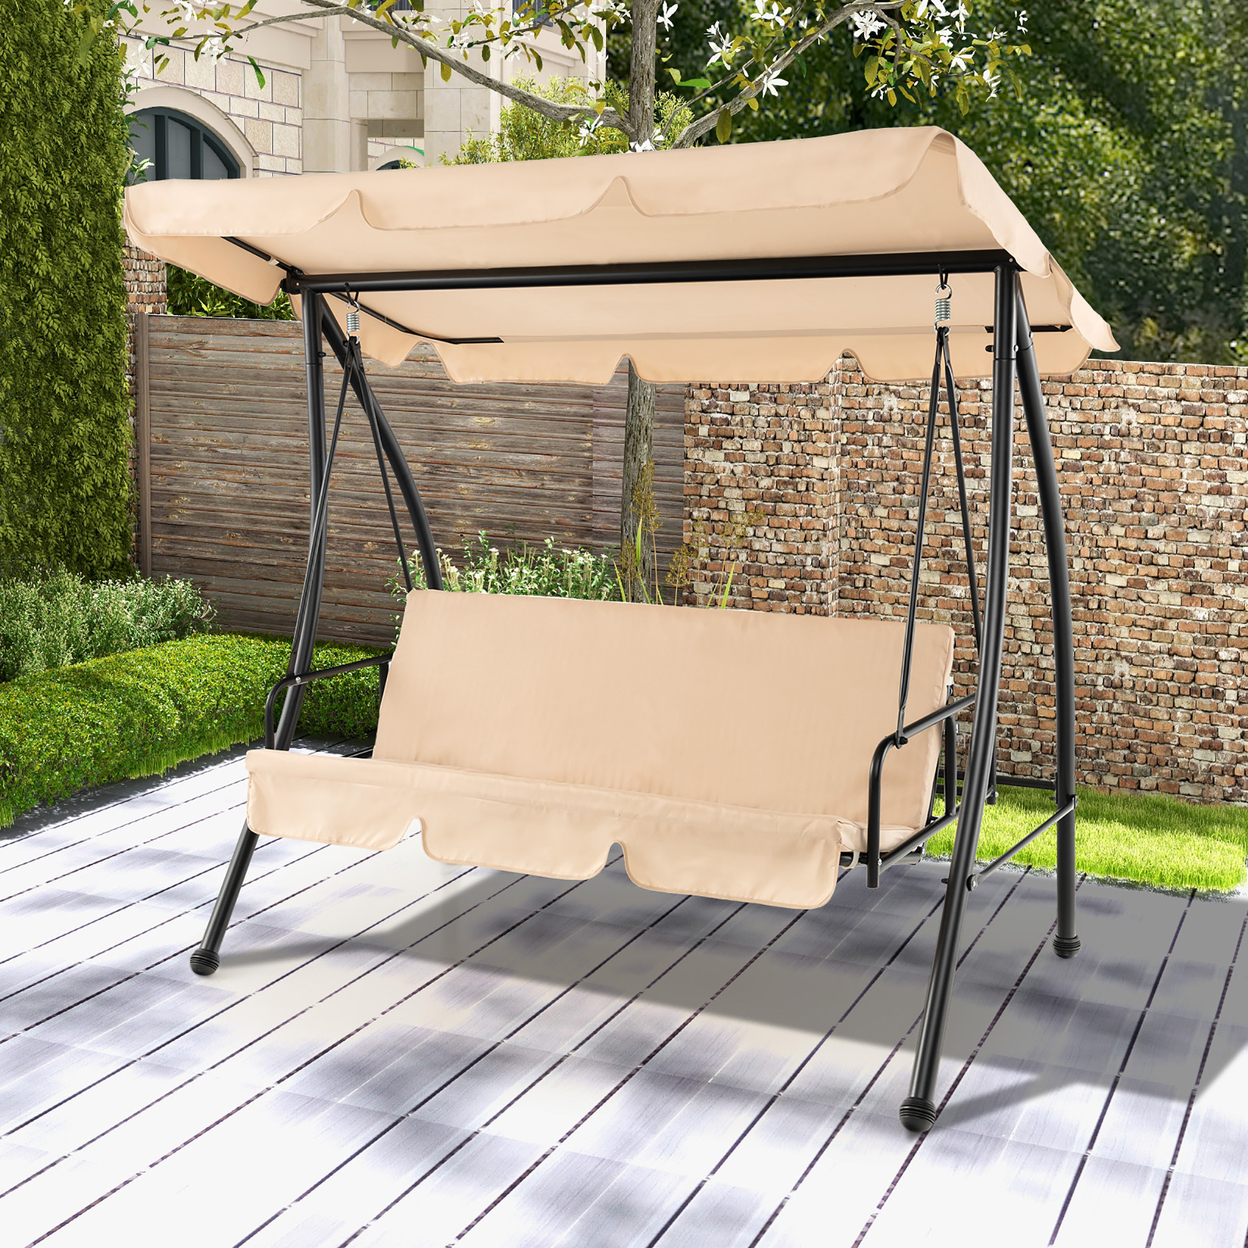 Outdoor Swing Chair Glider Patio Hammock Converting Flatbed W/ Adjustable Canopy